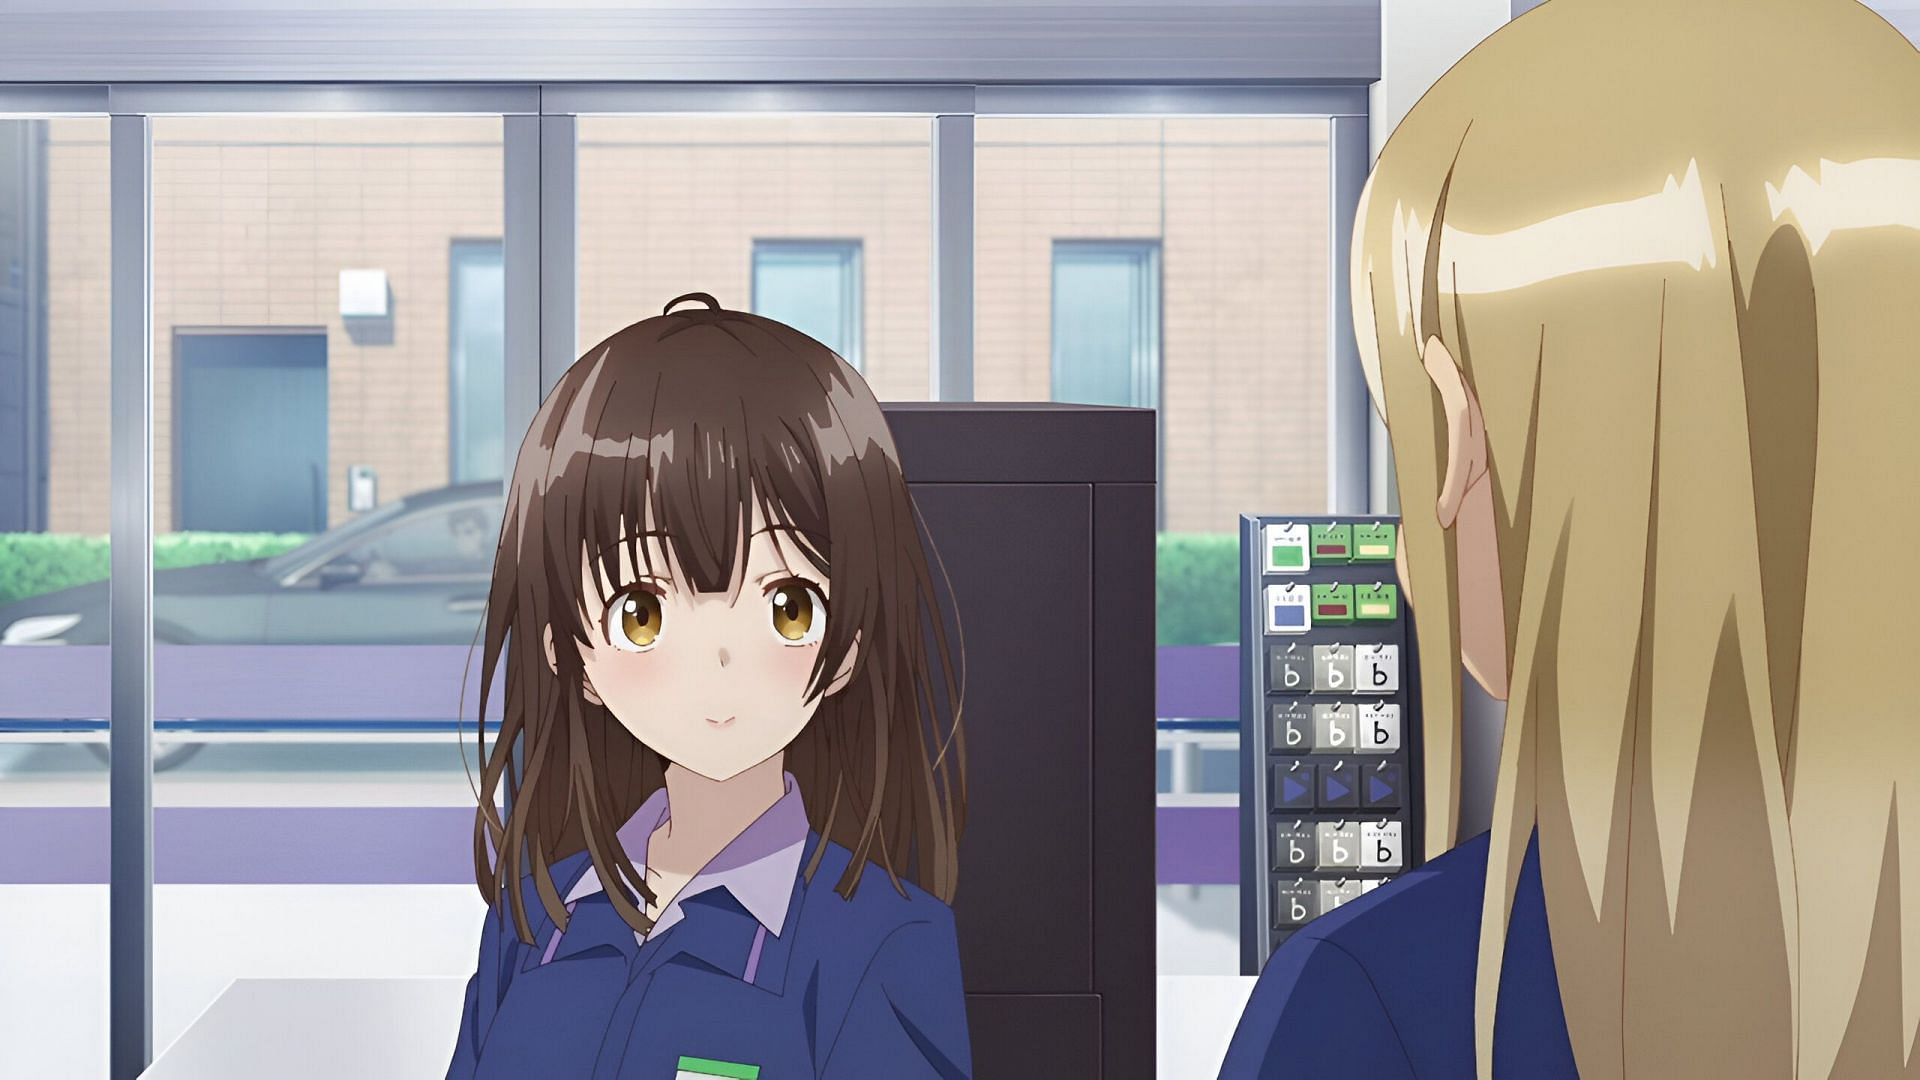 Sayu as seen in the anime (Image via Project no. 9)